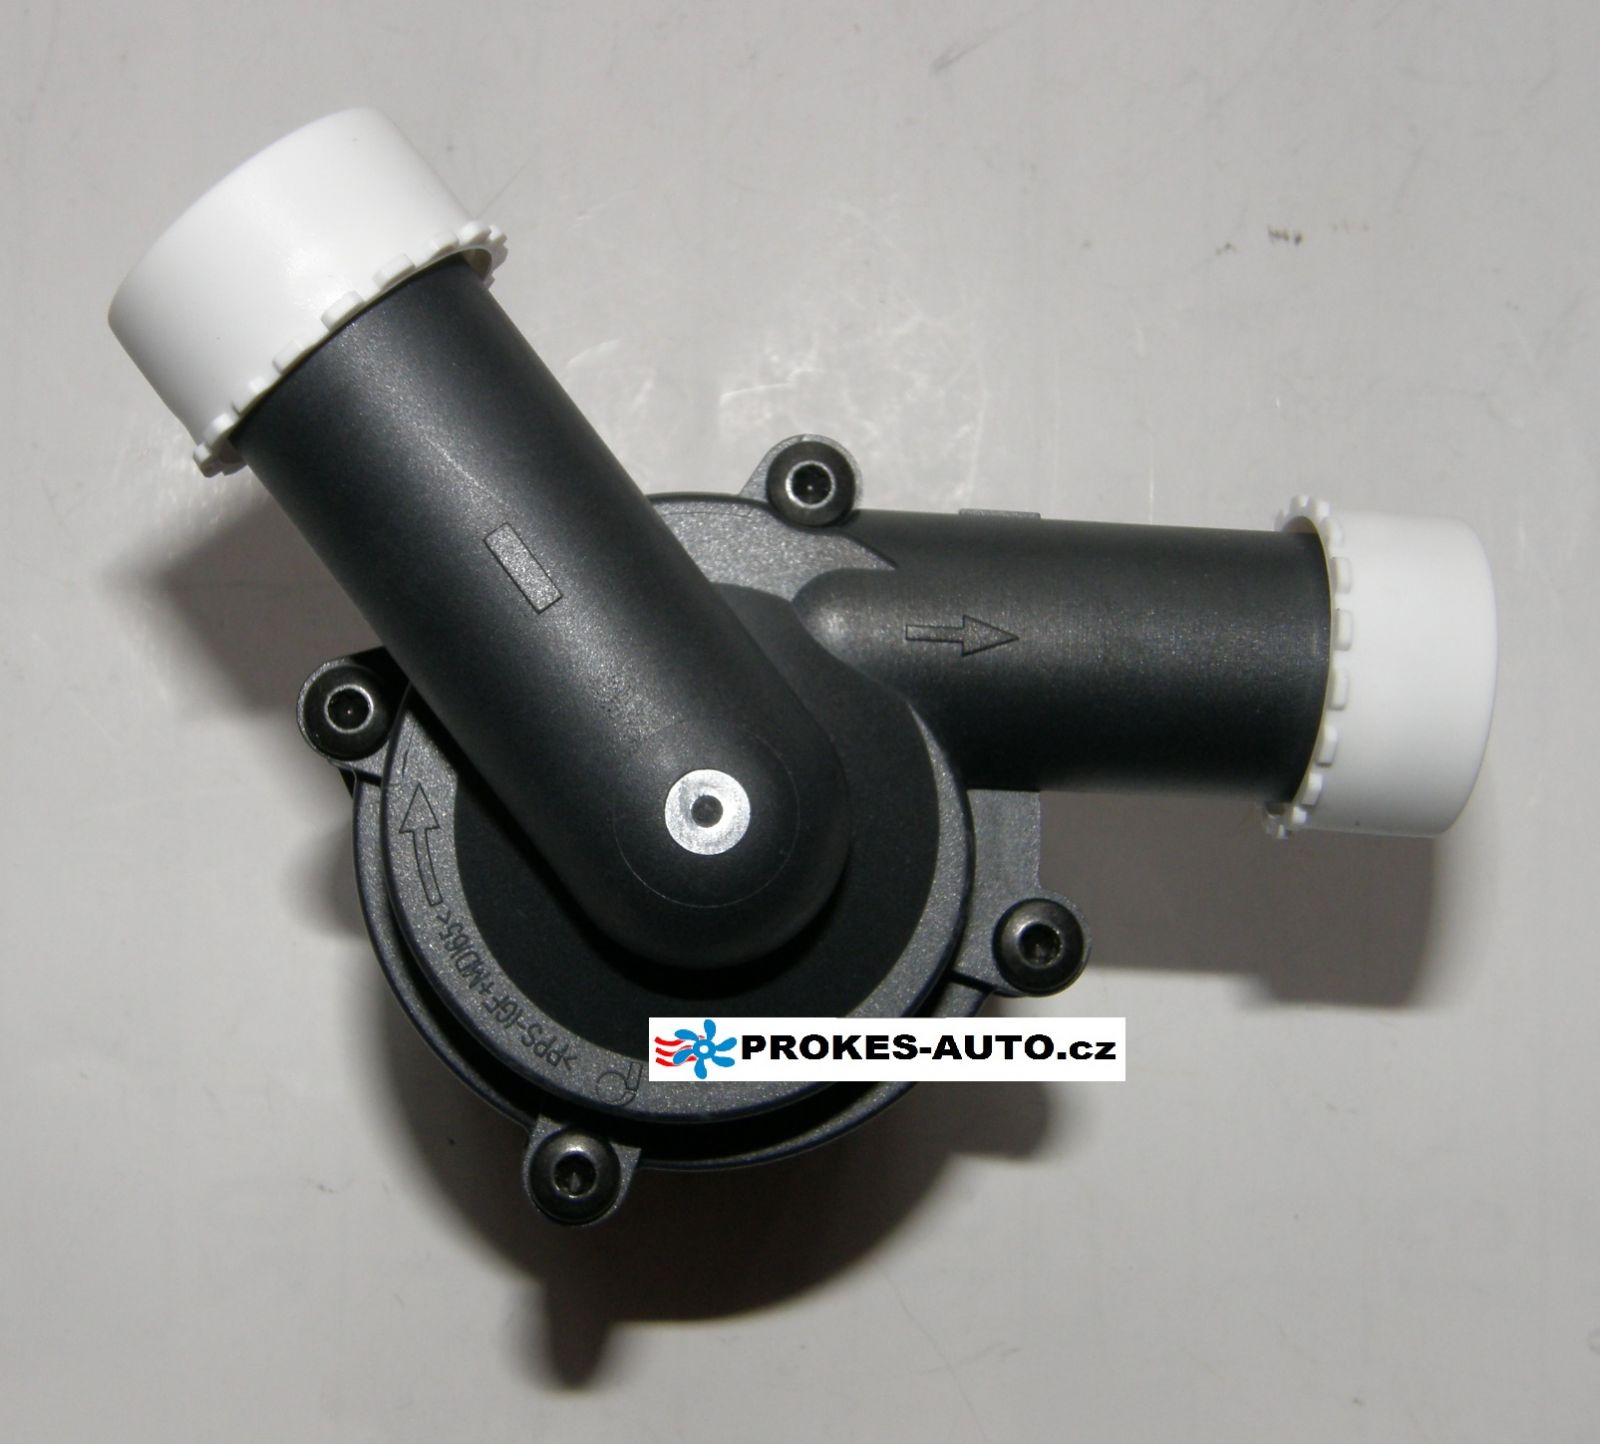 Details about   Water Circulation Pump Fit Eberspacher/Webasto 12V Thermo Heater Replace Durable